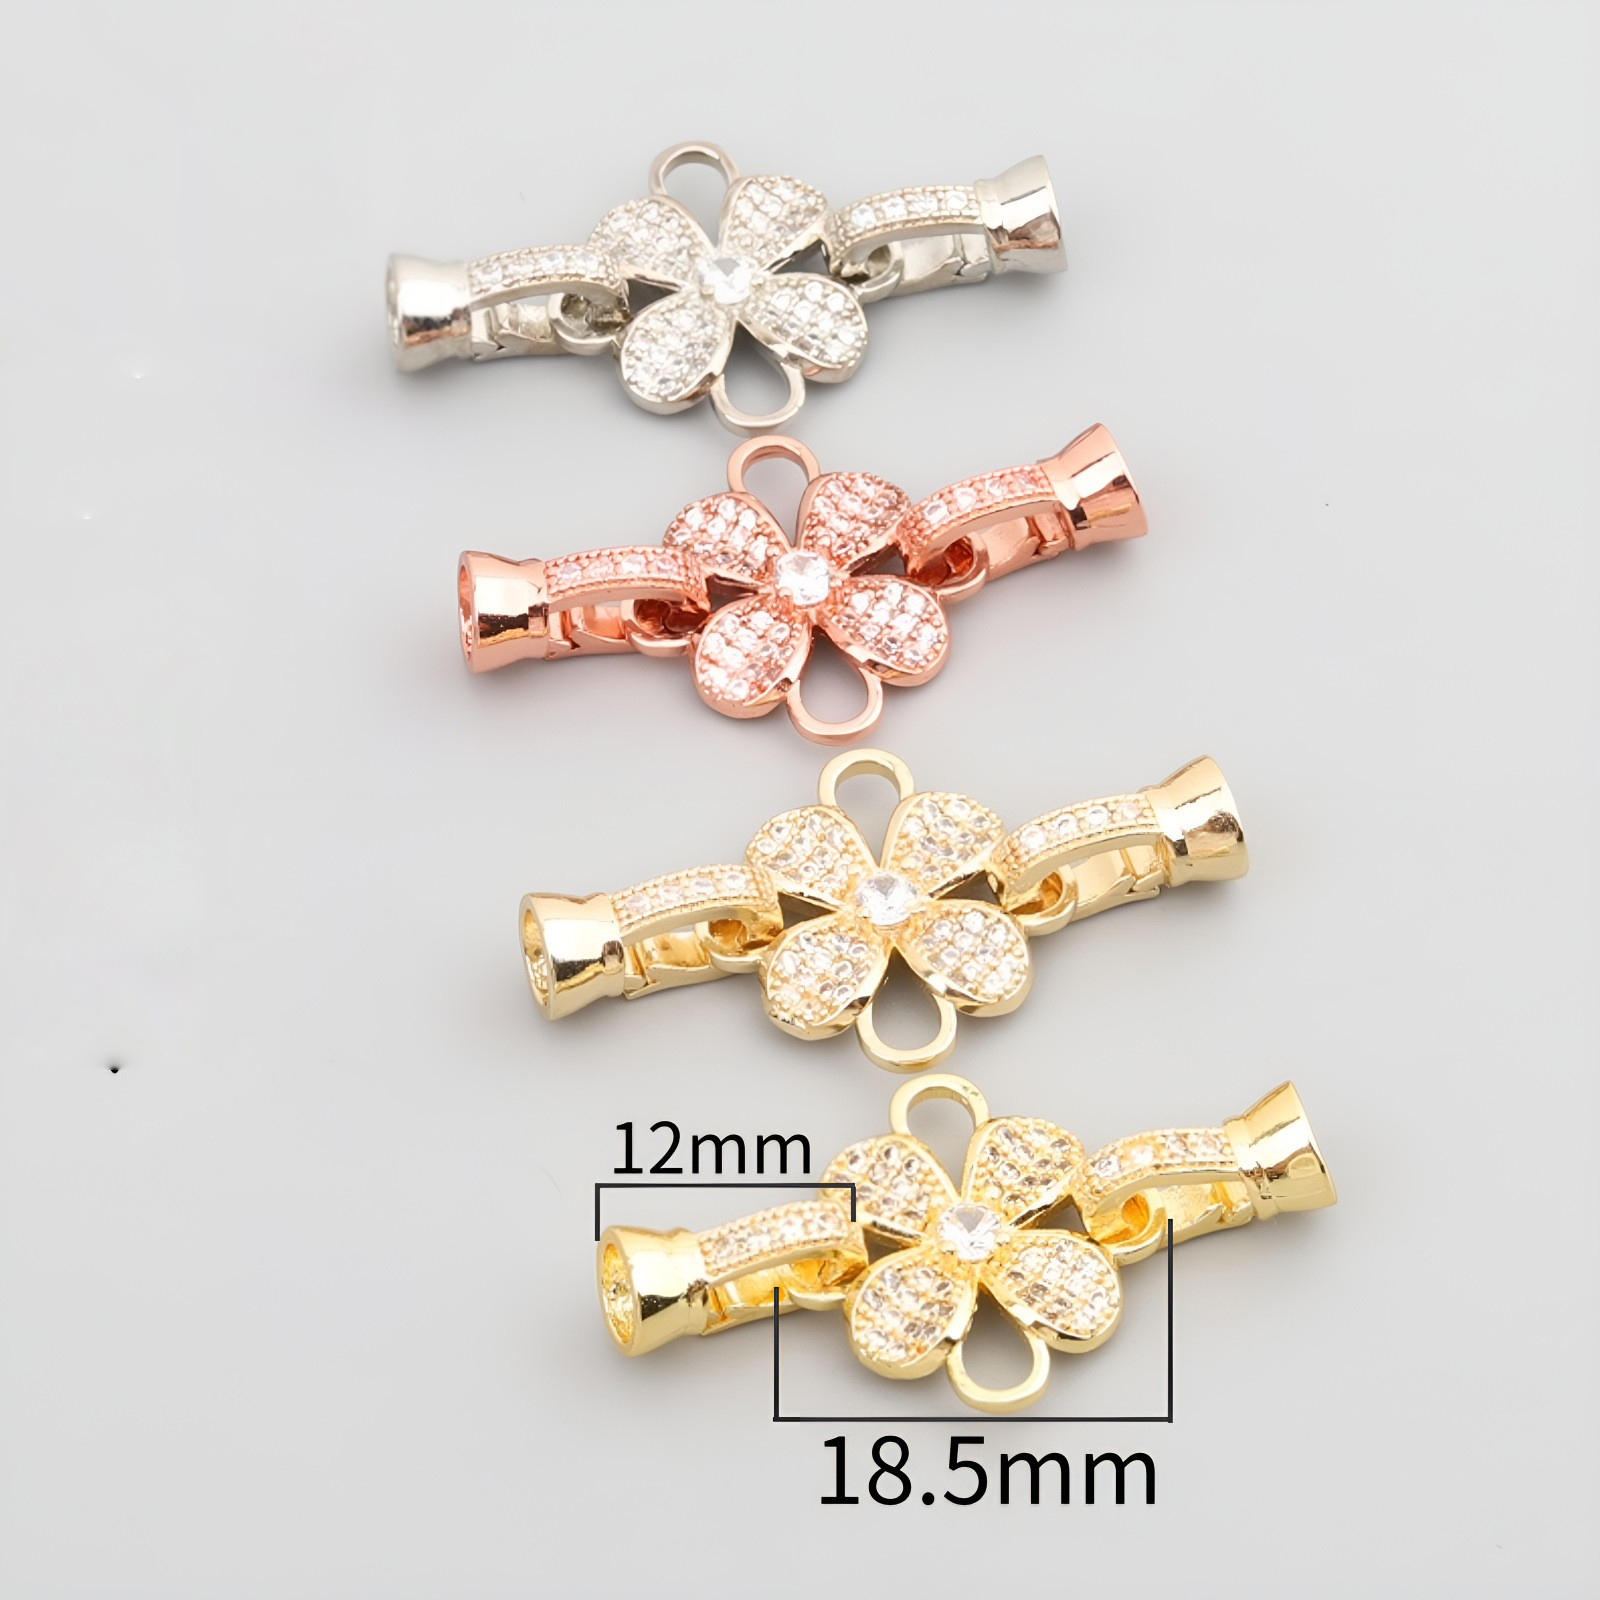 10:Flower-shaped button white gold/color preservation